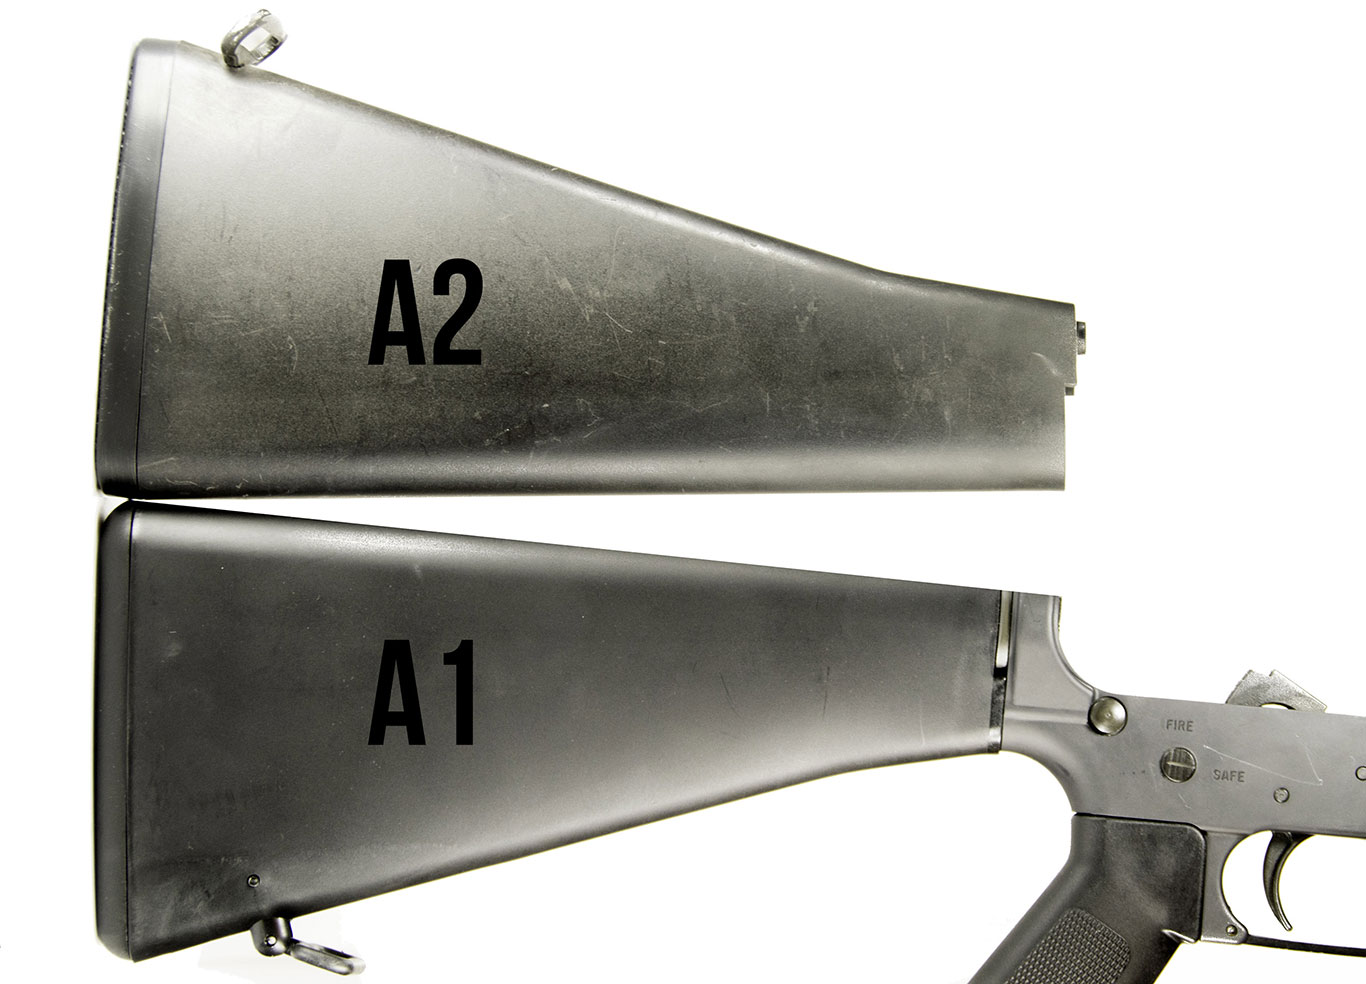 The A1-Length Retro Stock cuts the LOP by nearly two inches on a fixed-stock AR-15.